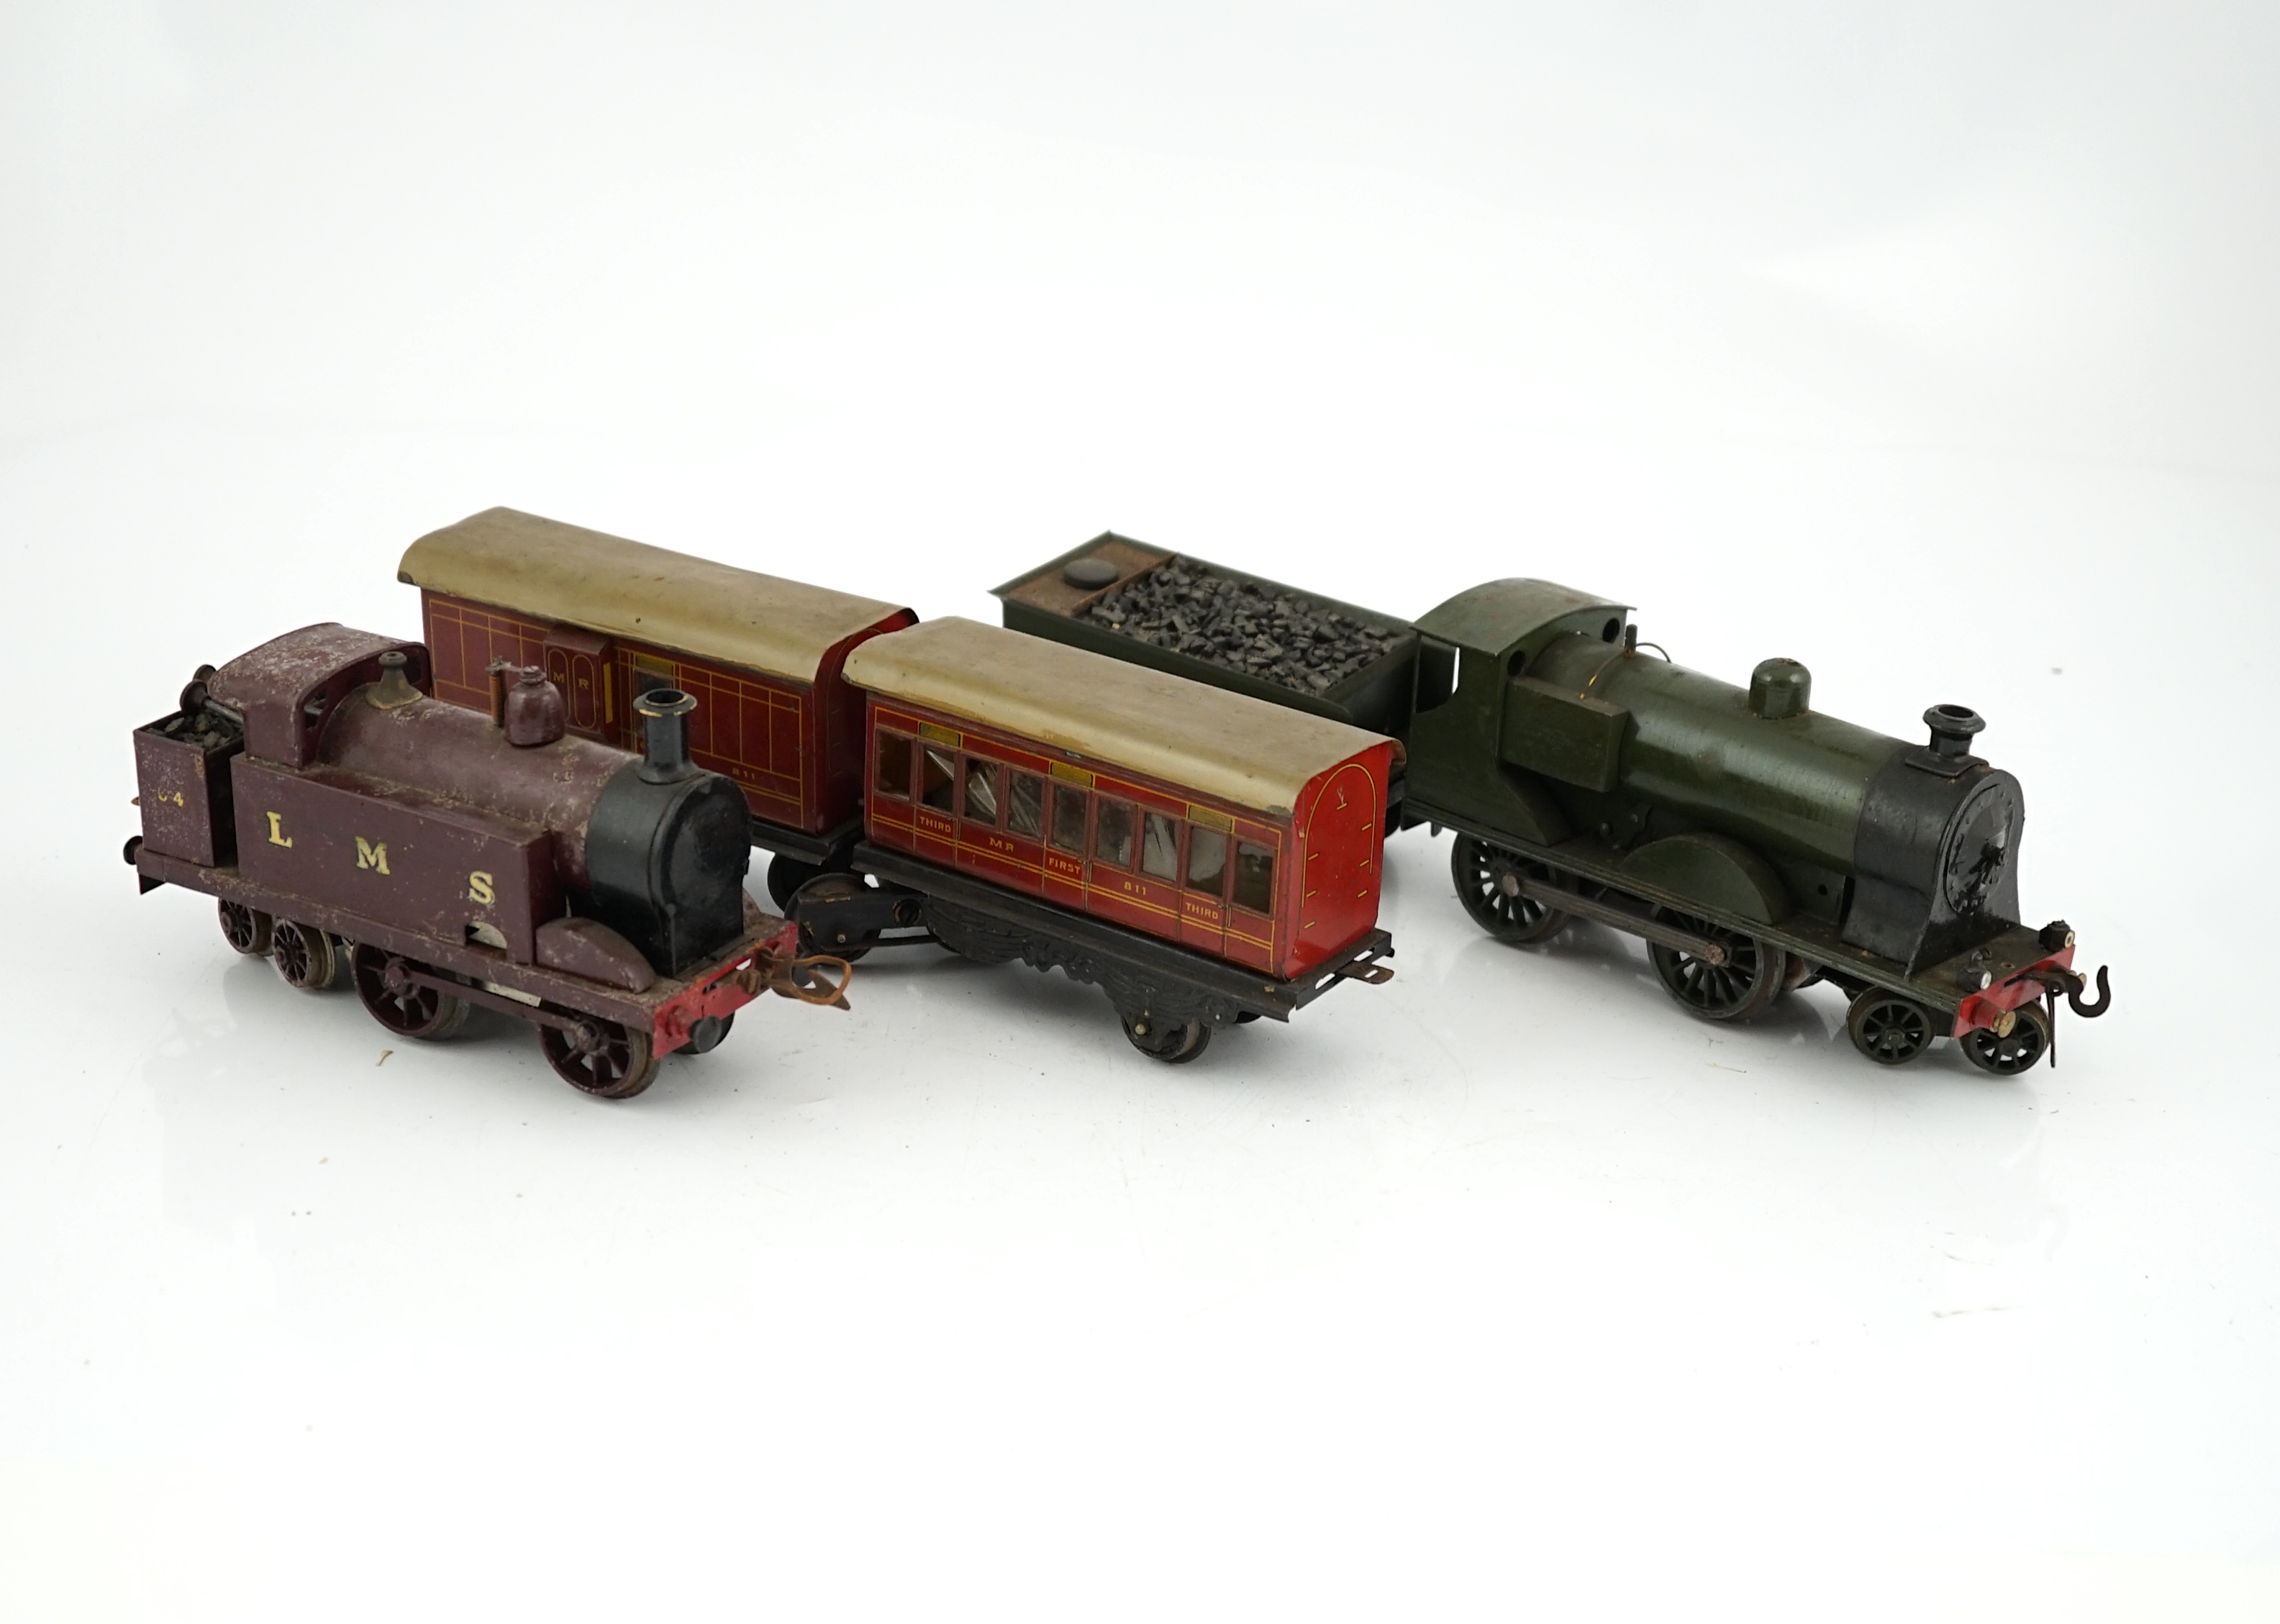 Ten 0 gauge tinplate railway items, most adapted from other parts and models, including three clockwork locomotives; n LSWR 4-4-0 tender loco, an LMS 0-4-4T loco and an SR 0-4-2T loco, together with four SR 4-wheel coach